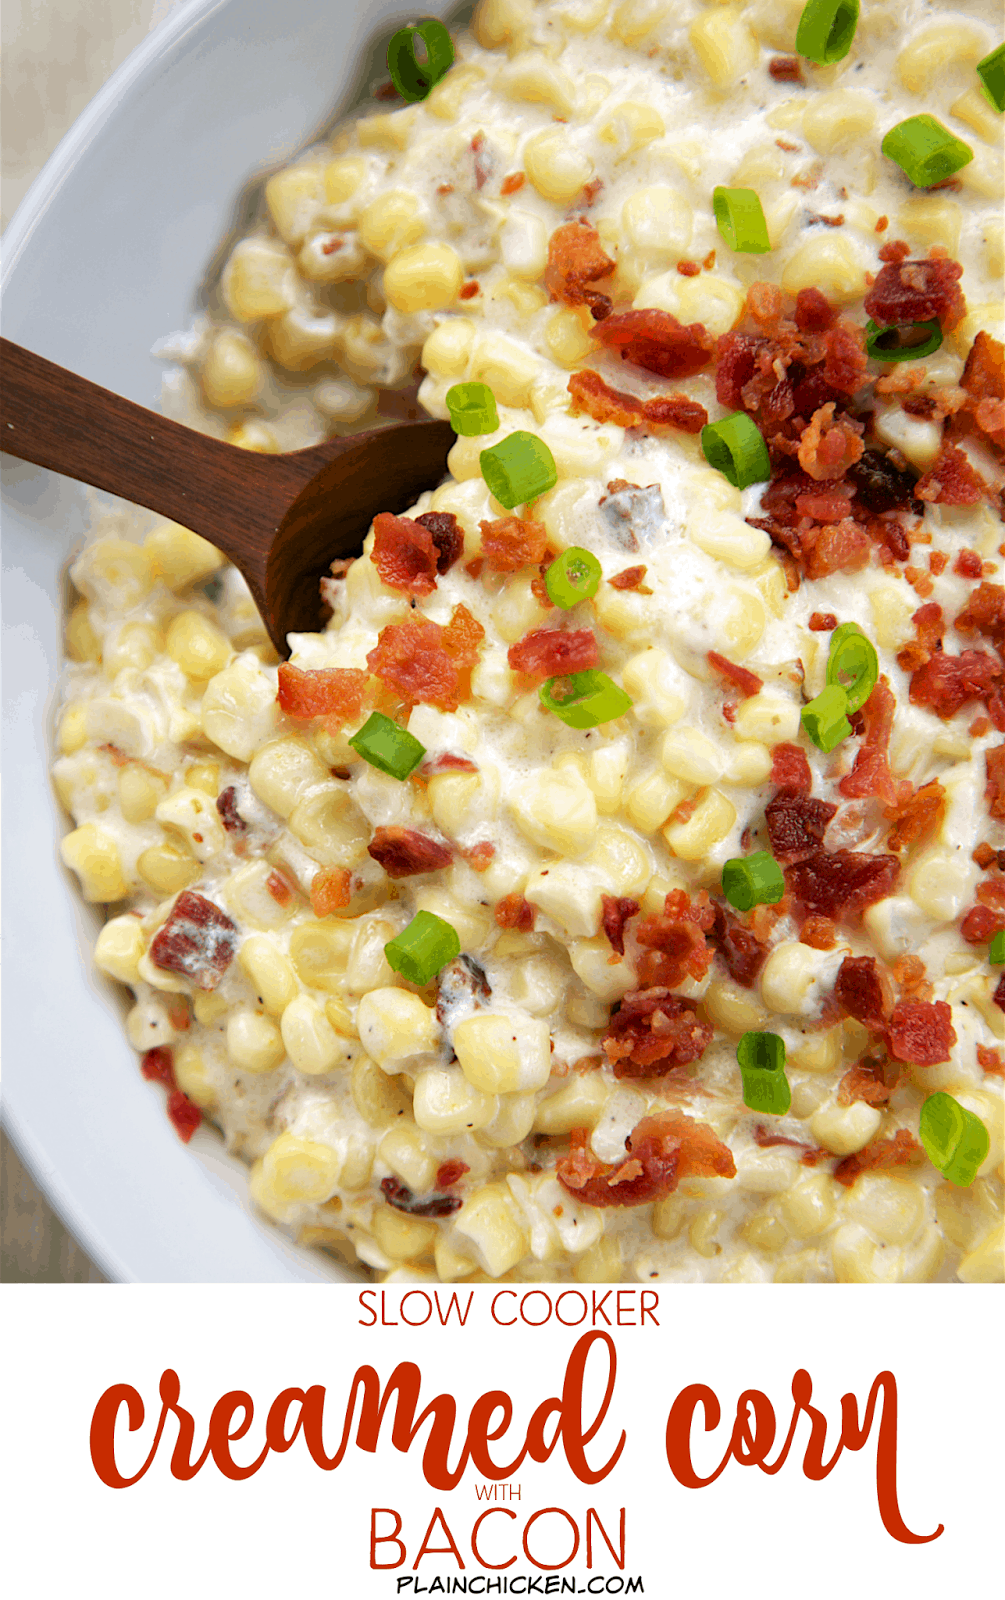 Slow Cooker Creamed Corn with Bacon - Corn, cream cheese, heavy cream, milk, bacon and green onions. YUM! It is super creamy with a hint of smokiness from the bacon. This recipe makes a lot and would be great for a potluck. This is seriously THE BEST corn recipe! I could have made a meal out of this! SO good!